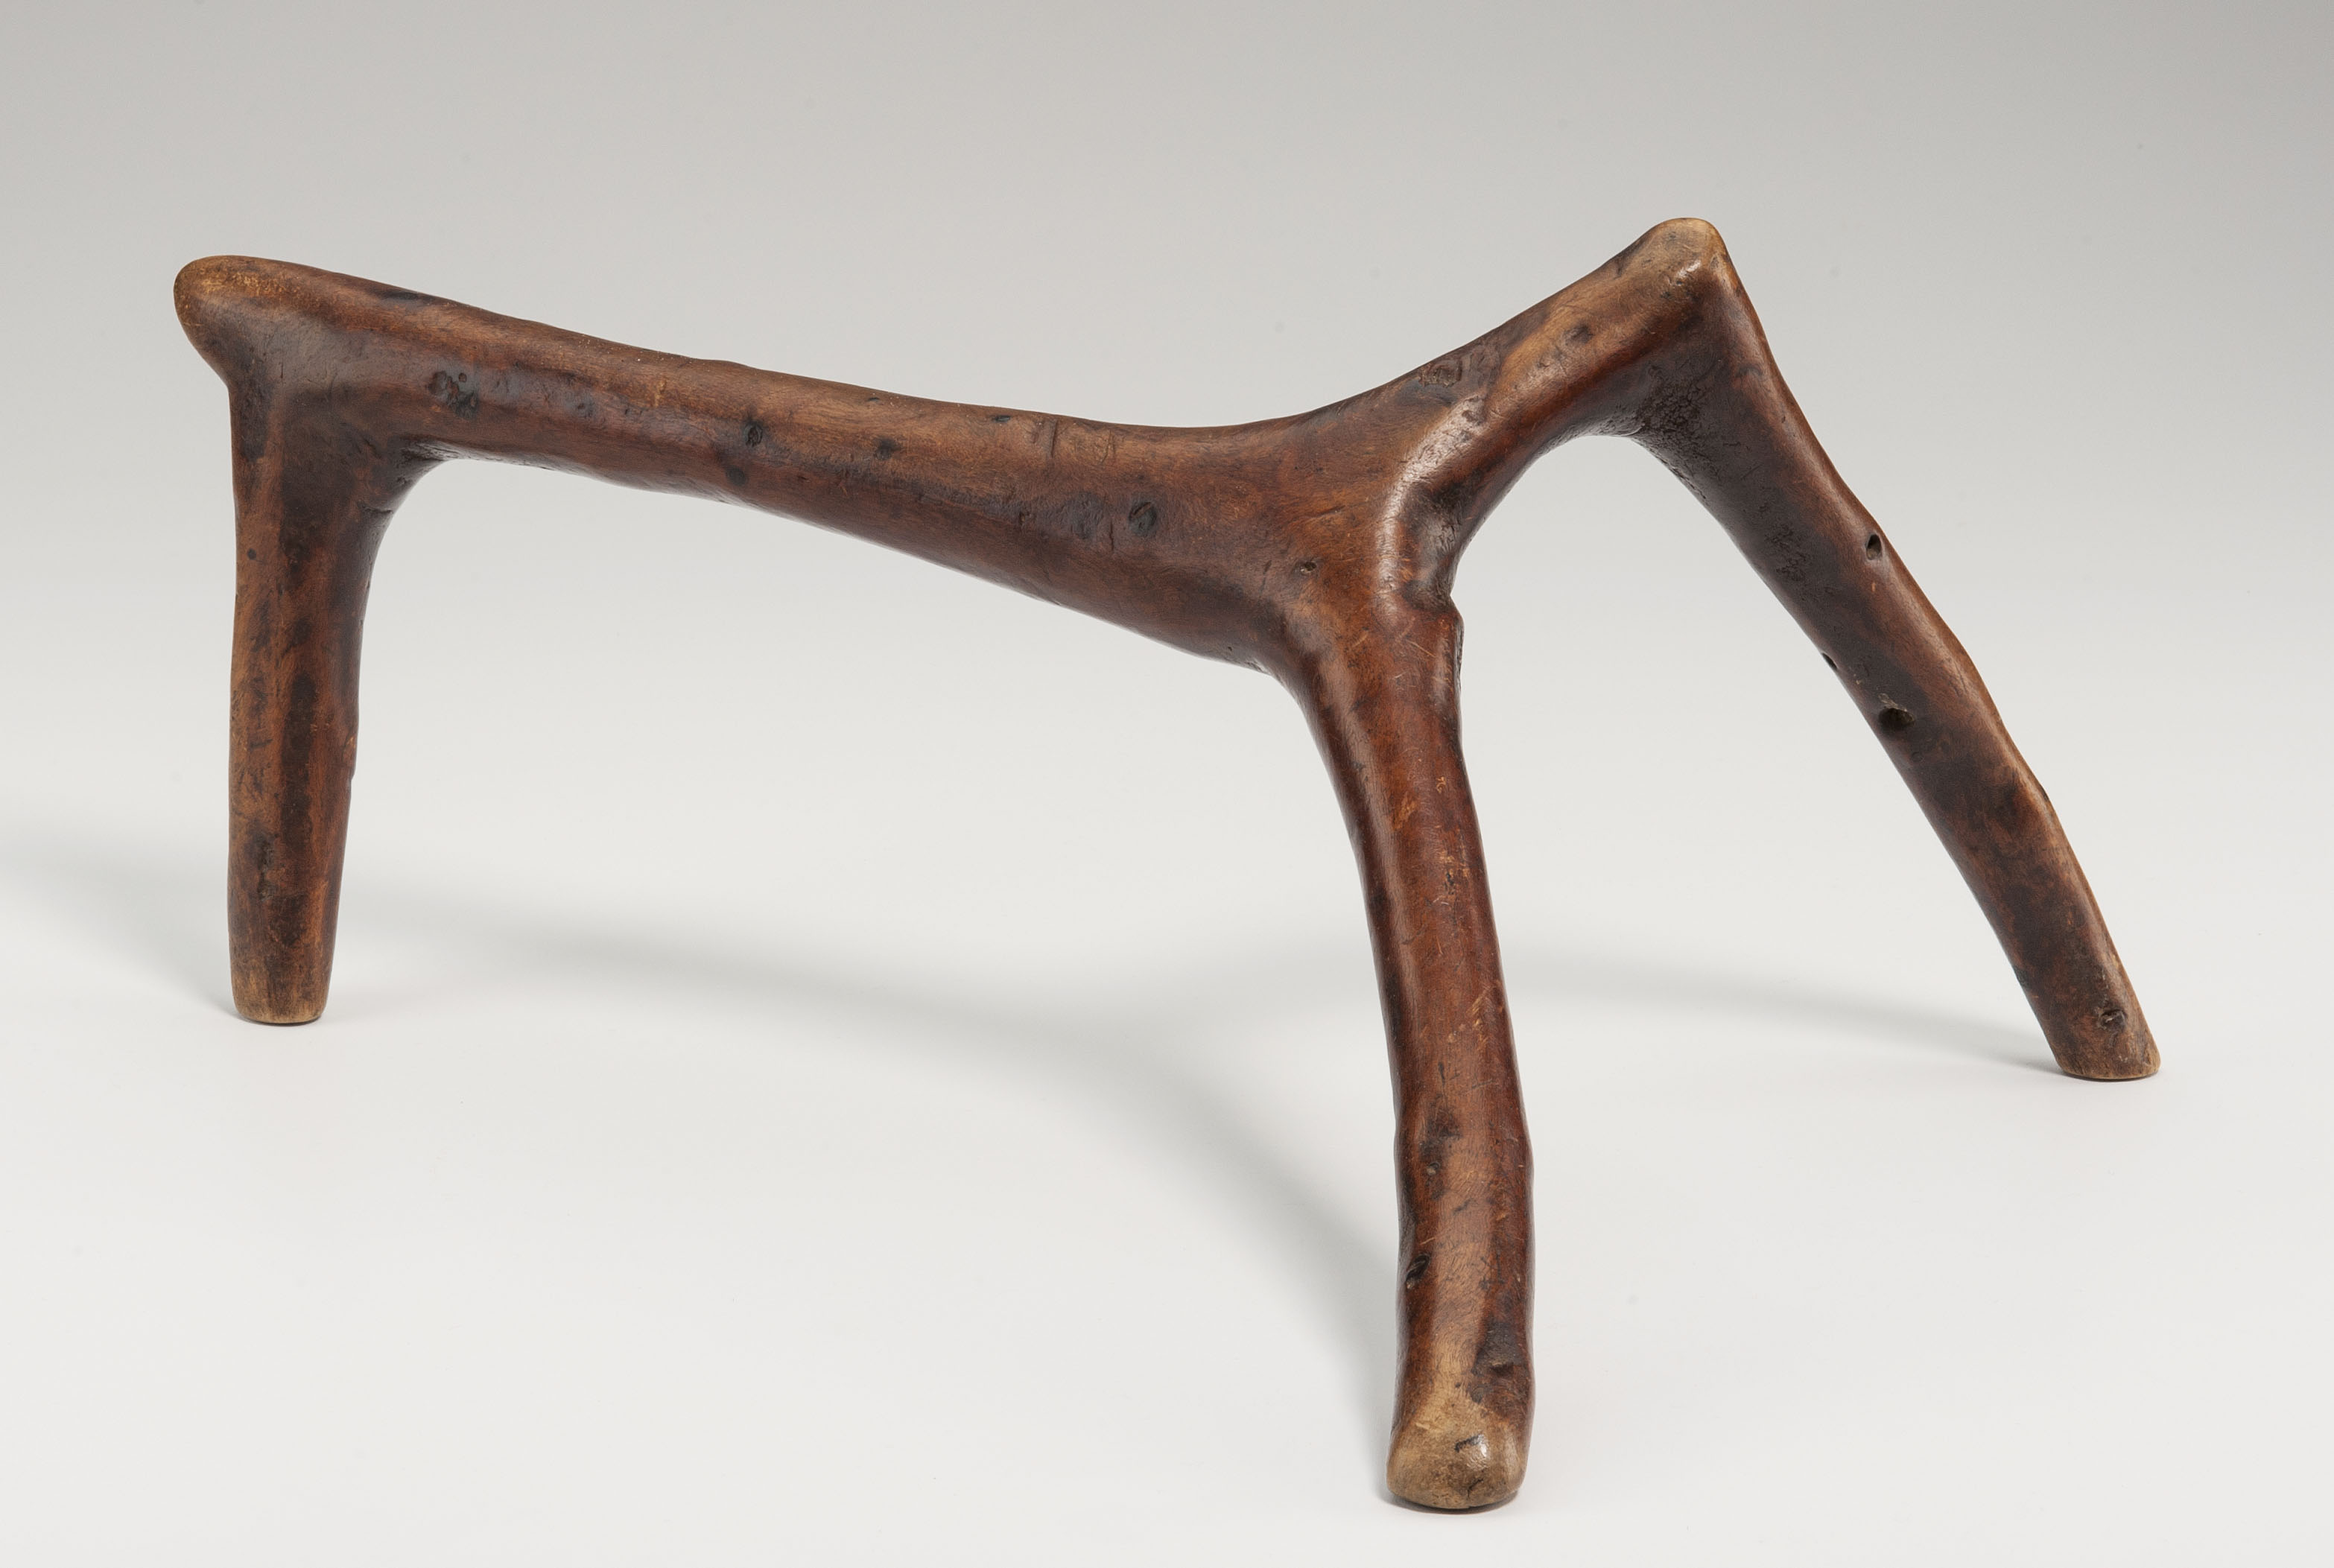 Headrest/Stool by Unknown Artist - Collected near Baragoi in 1978 - 19.7 x 43.5 cm Indiana University Art Museum